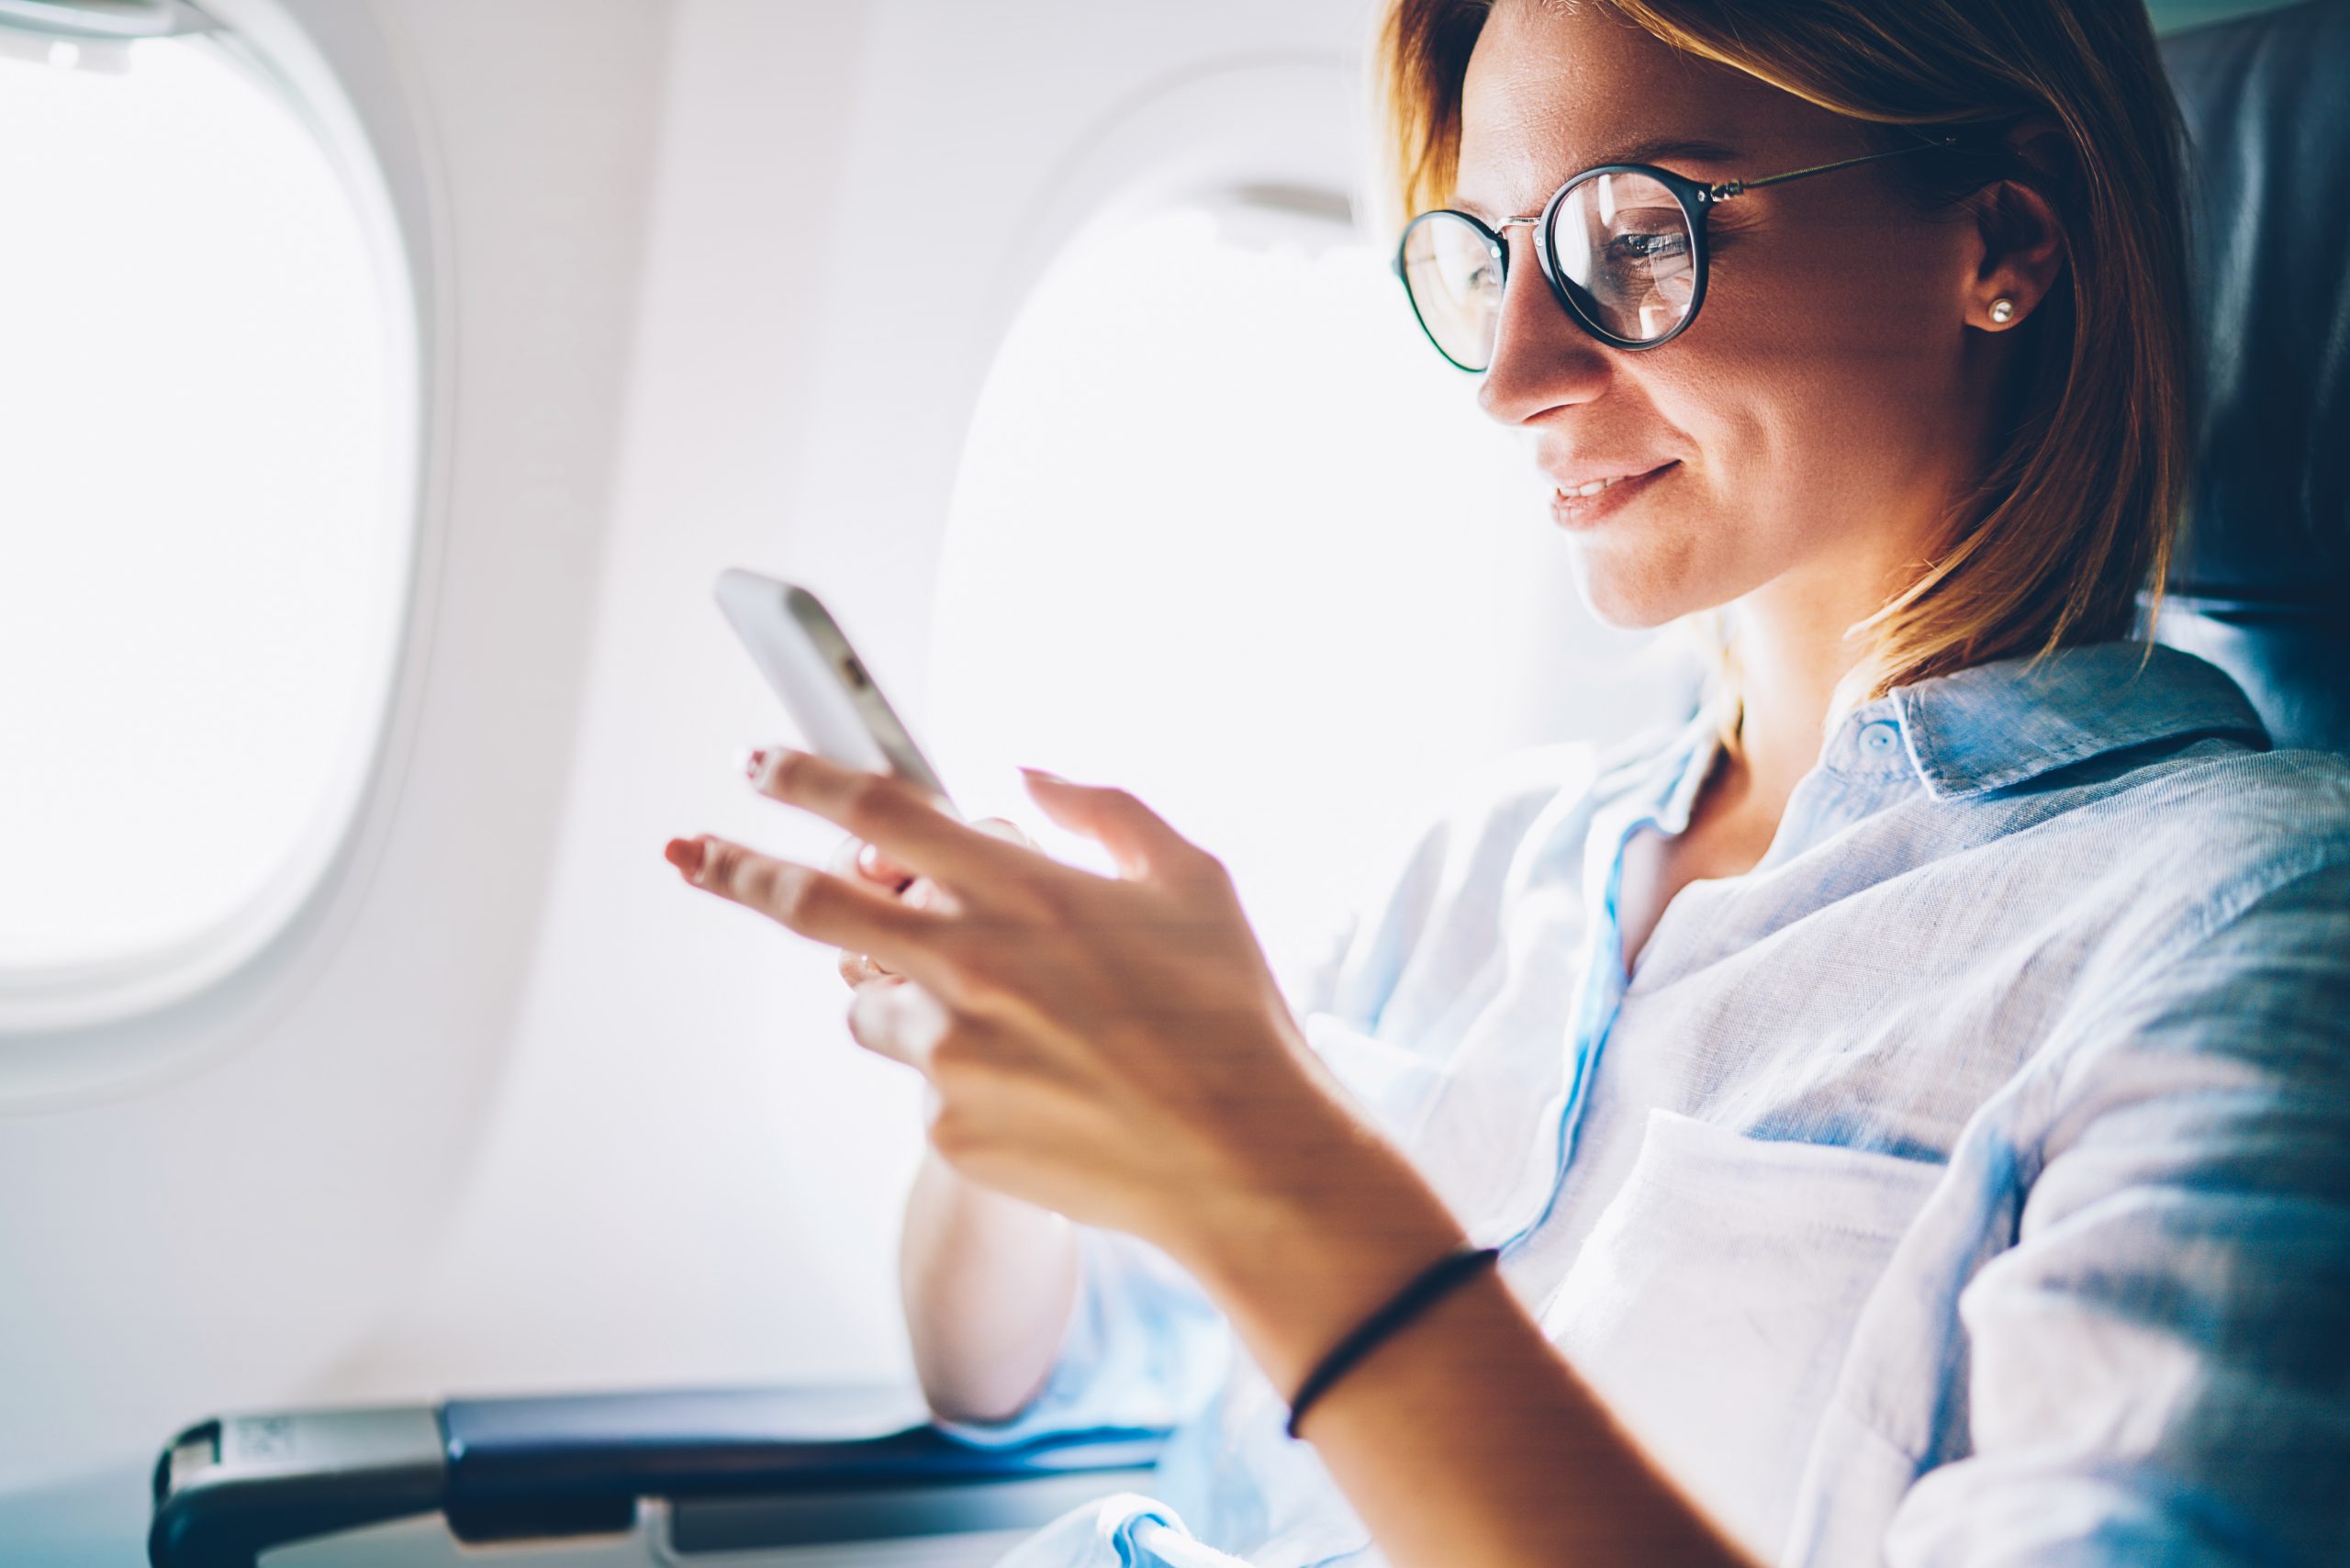 Airline passenger satisfaction: the importance of customer services